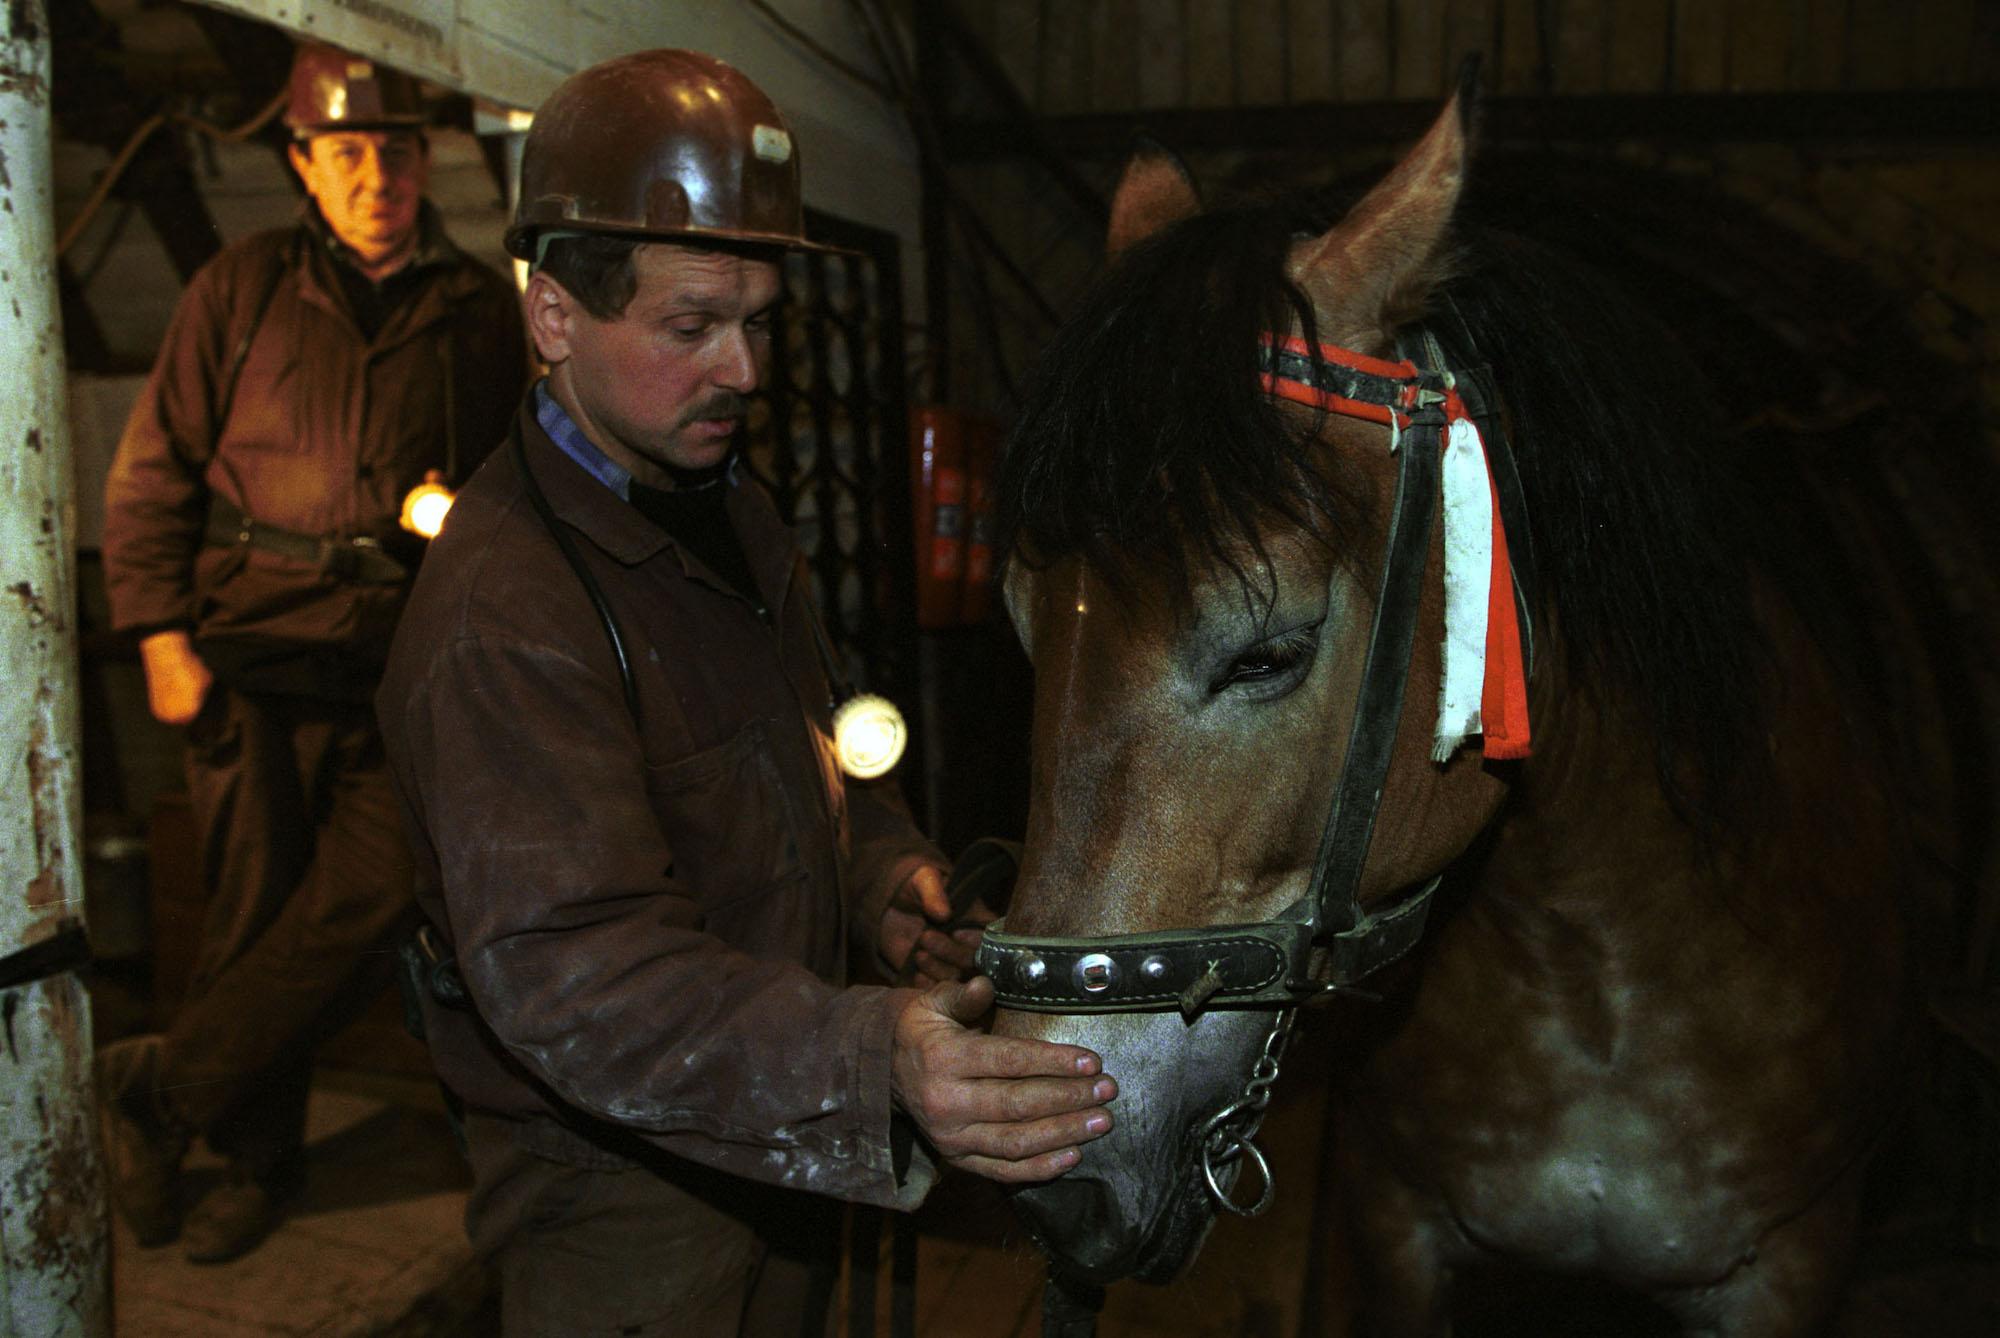 In the Wieliczka Salt Mine, horses helped miners in work even at the end of the 20th century. The last horse, Baśka, left the mine ceremoniously in 2002. – © Rafał Stachurski